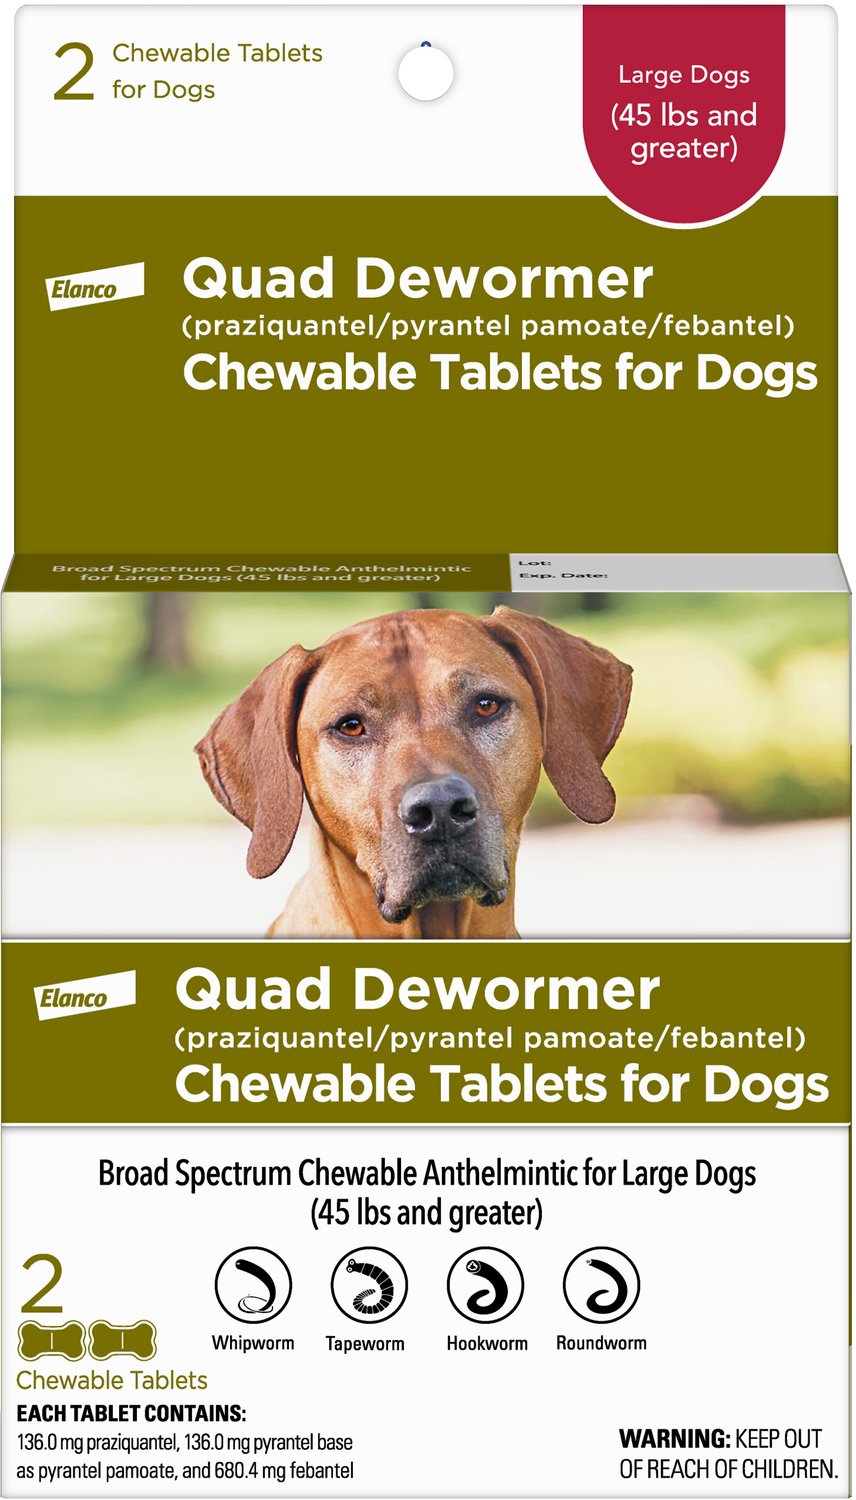 Quad Dewormer for Large Dogs